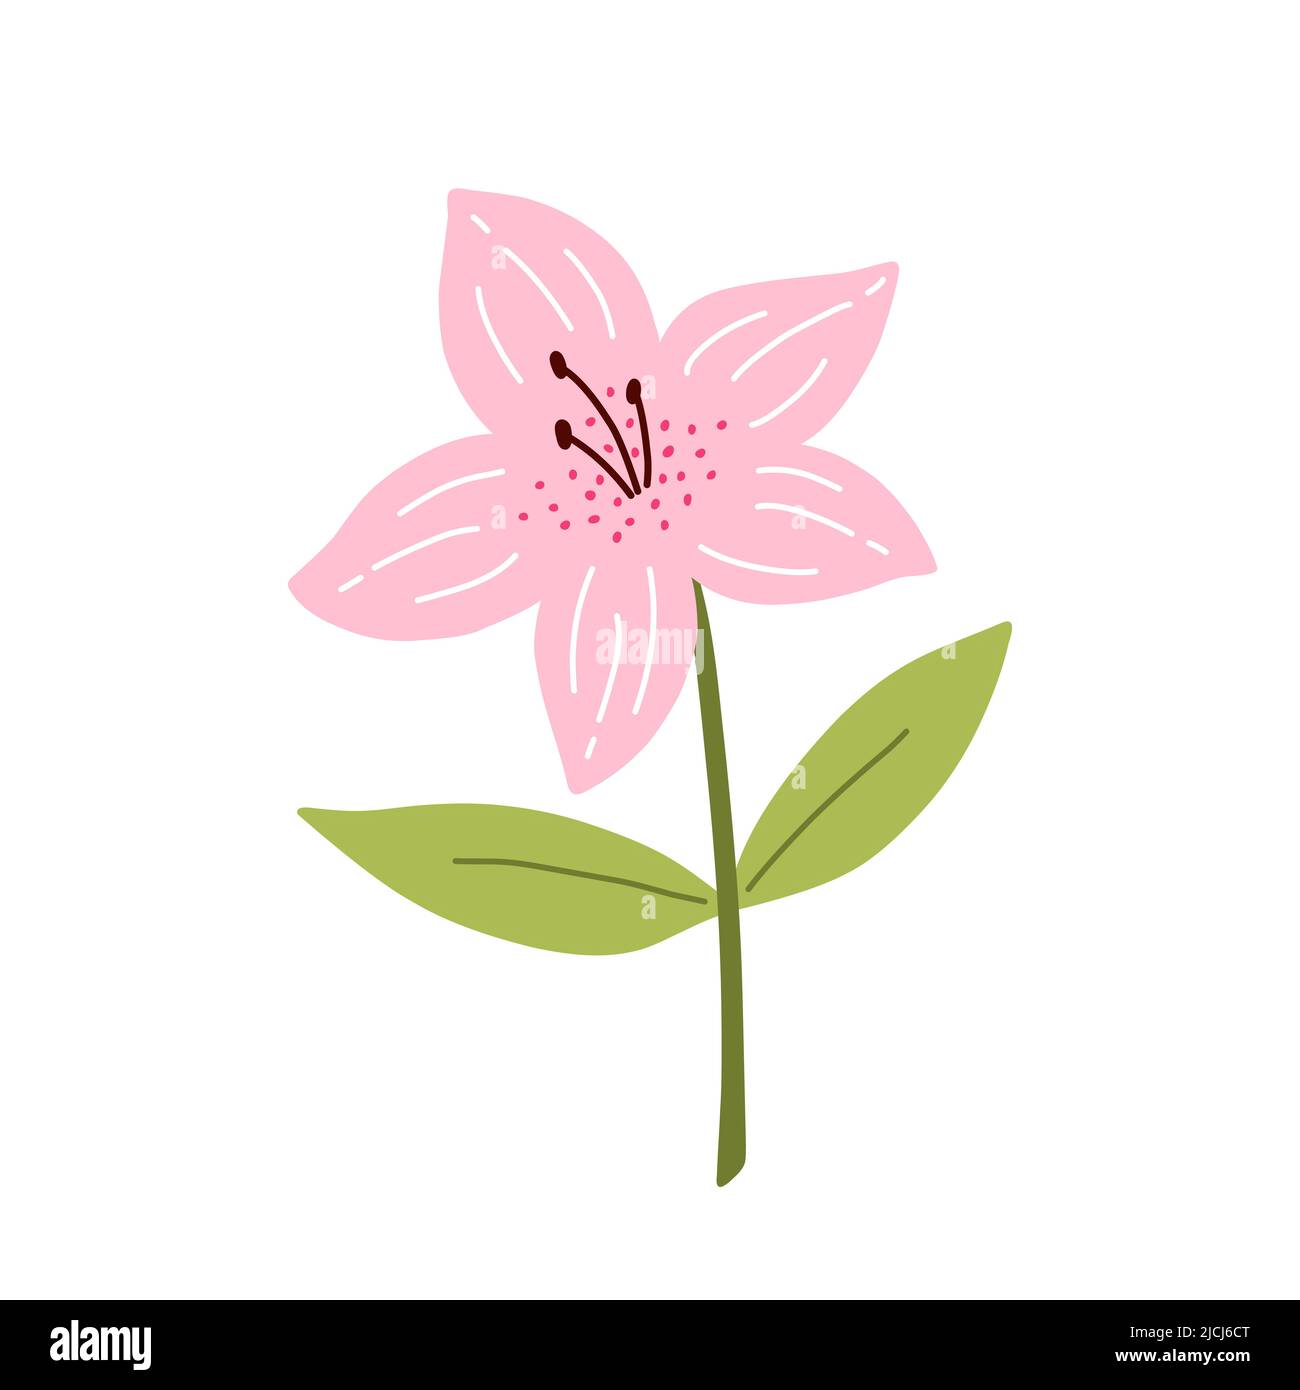 Cute azalea flower with leaves isolated on white background. Vector illustration in hand-drawn flat style. Perfect for cards, logo, decorations Stock Vector